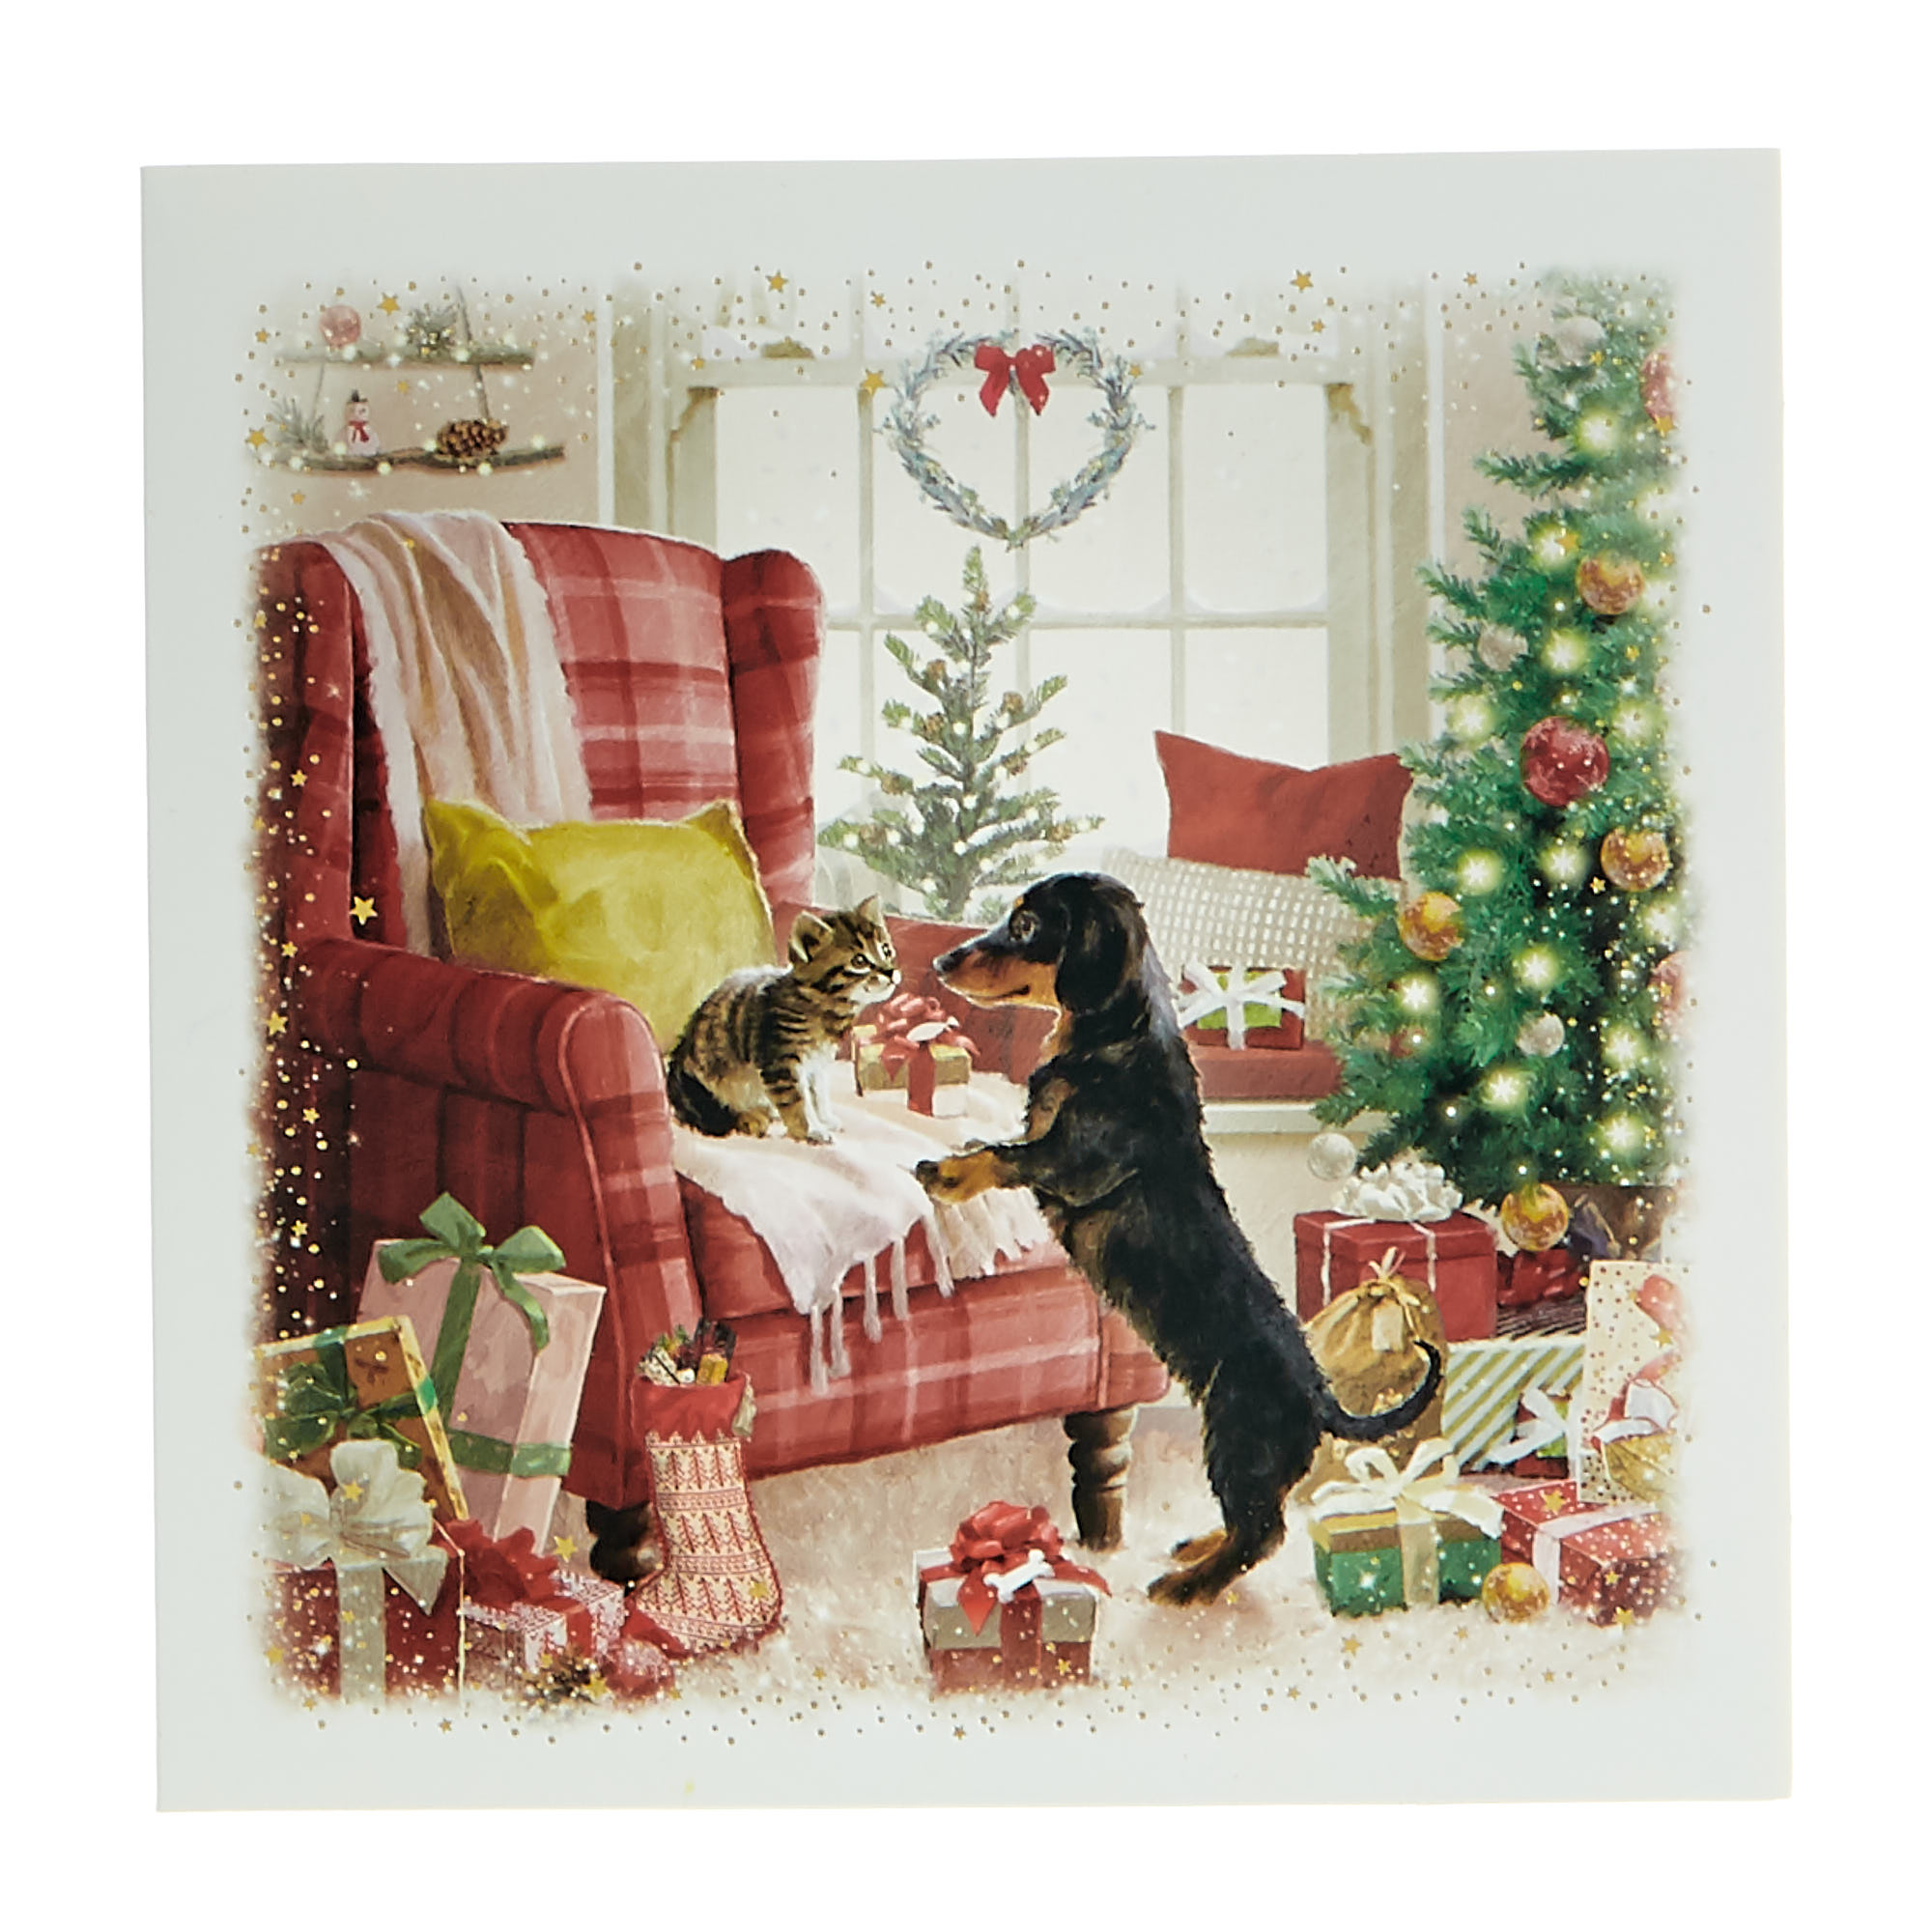 16 Charity Christmas Cards - Cats & Dogs (2 Designs)